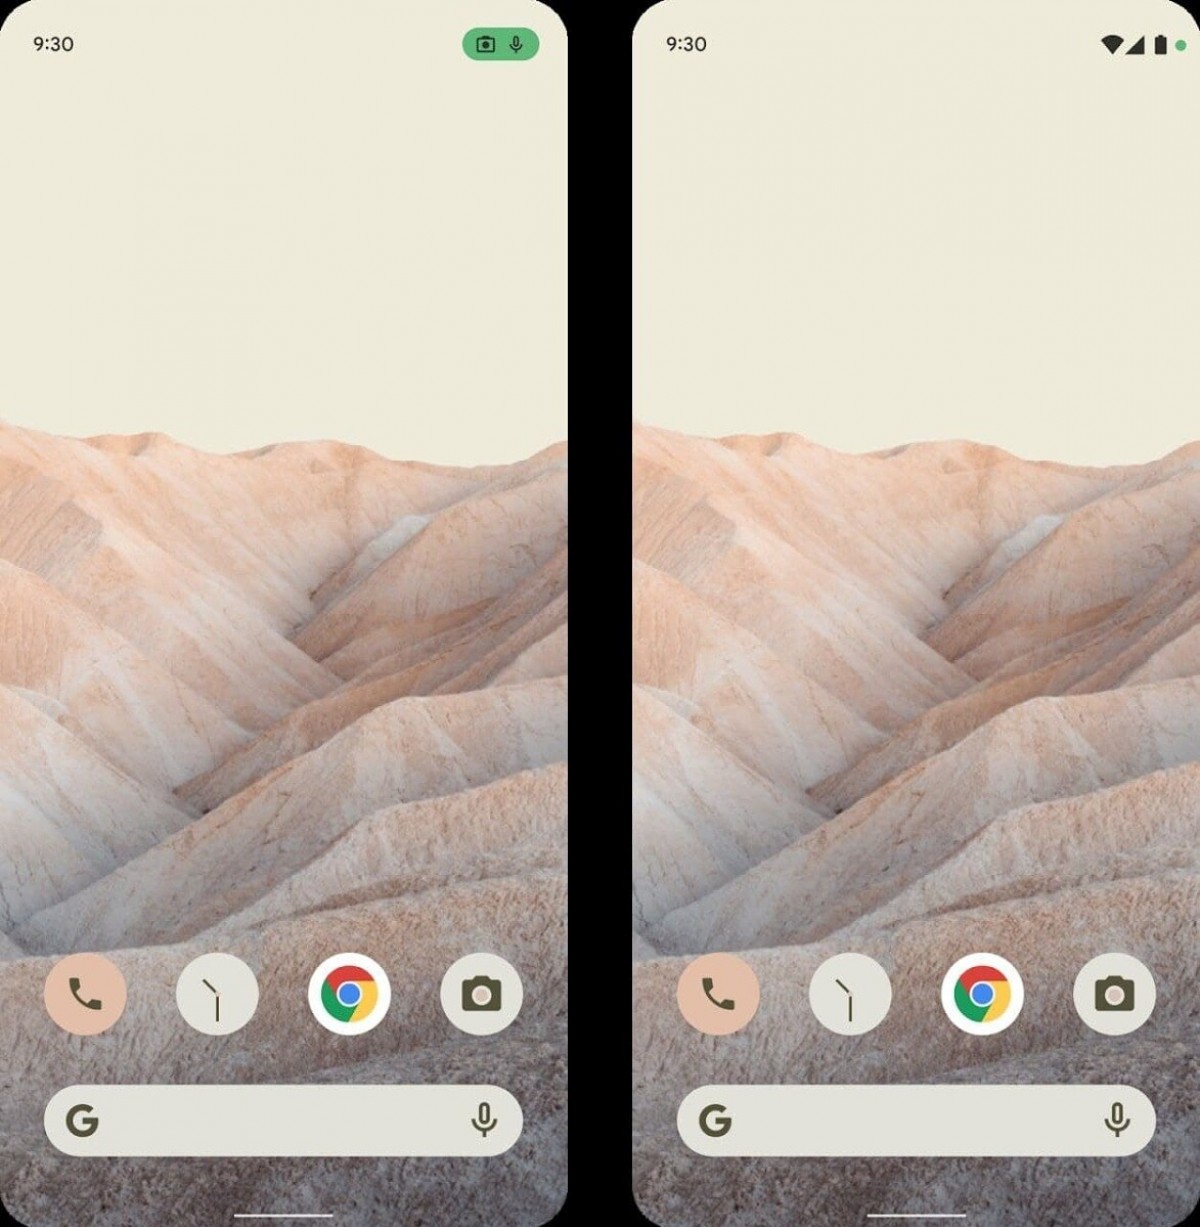 Here's our first look at the Android 12 redesign